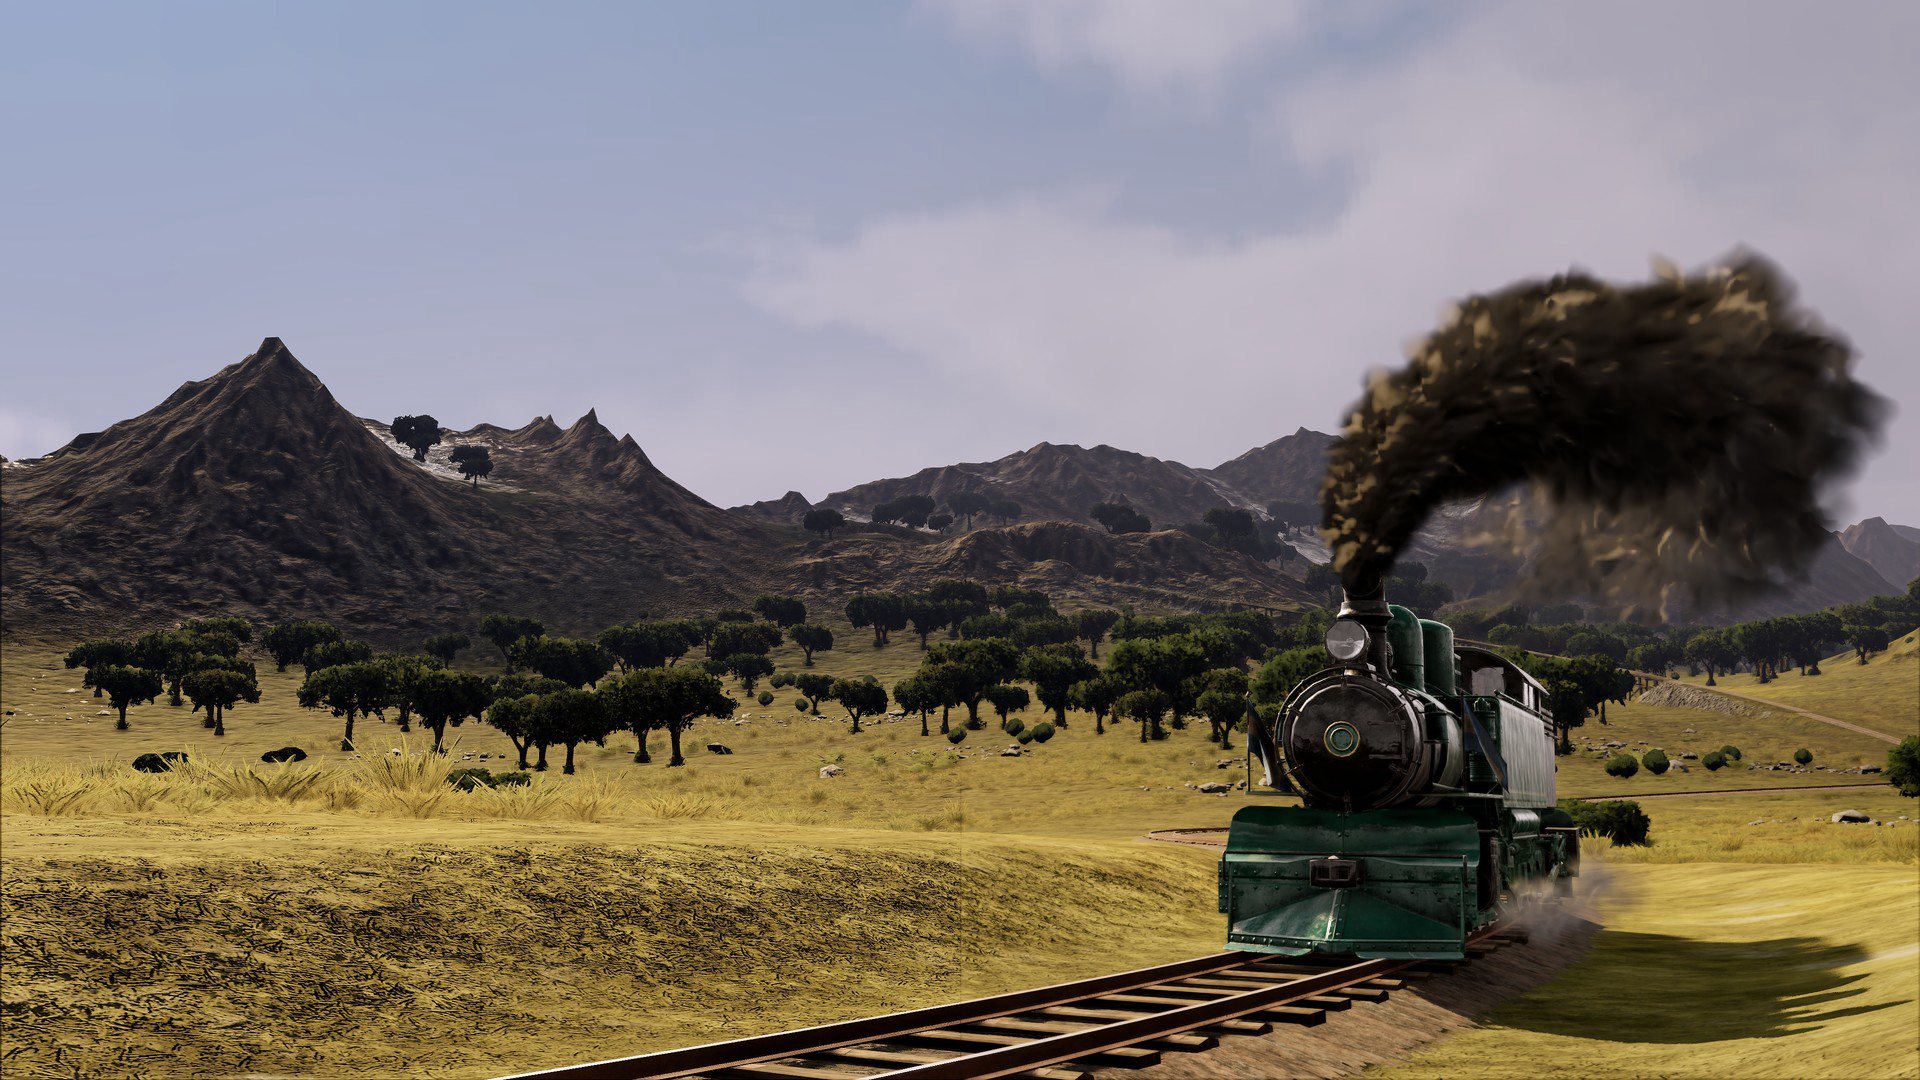 Railway Empire - Crossing The Andes DLC Steam CD Key